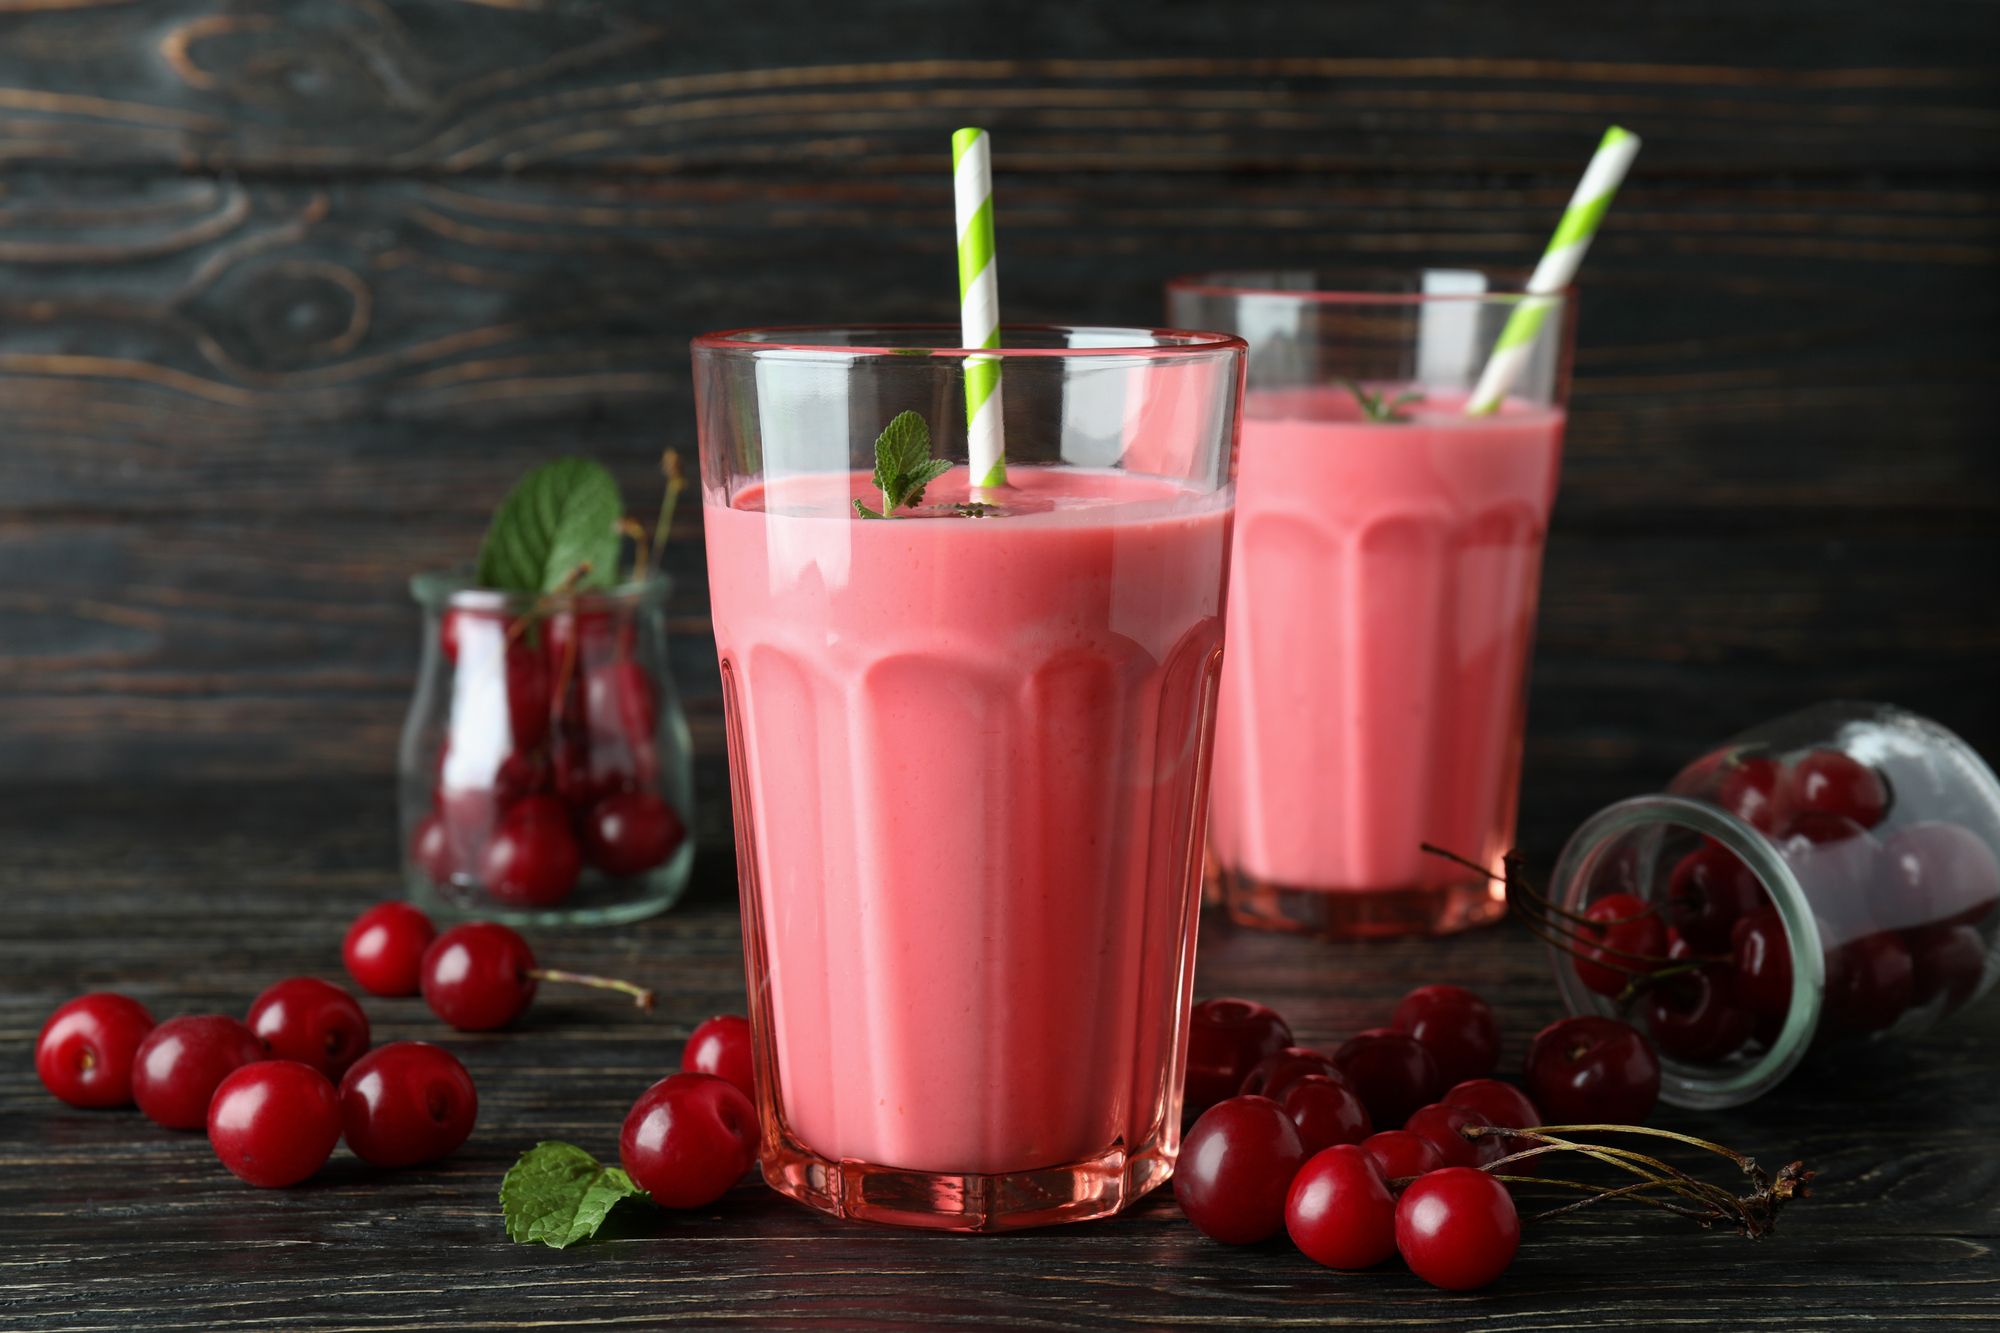 Delicious pink smoothie with mint, straws, and cheries tossed on the side